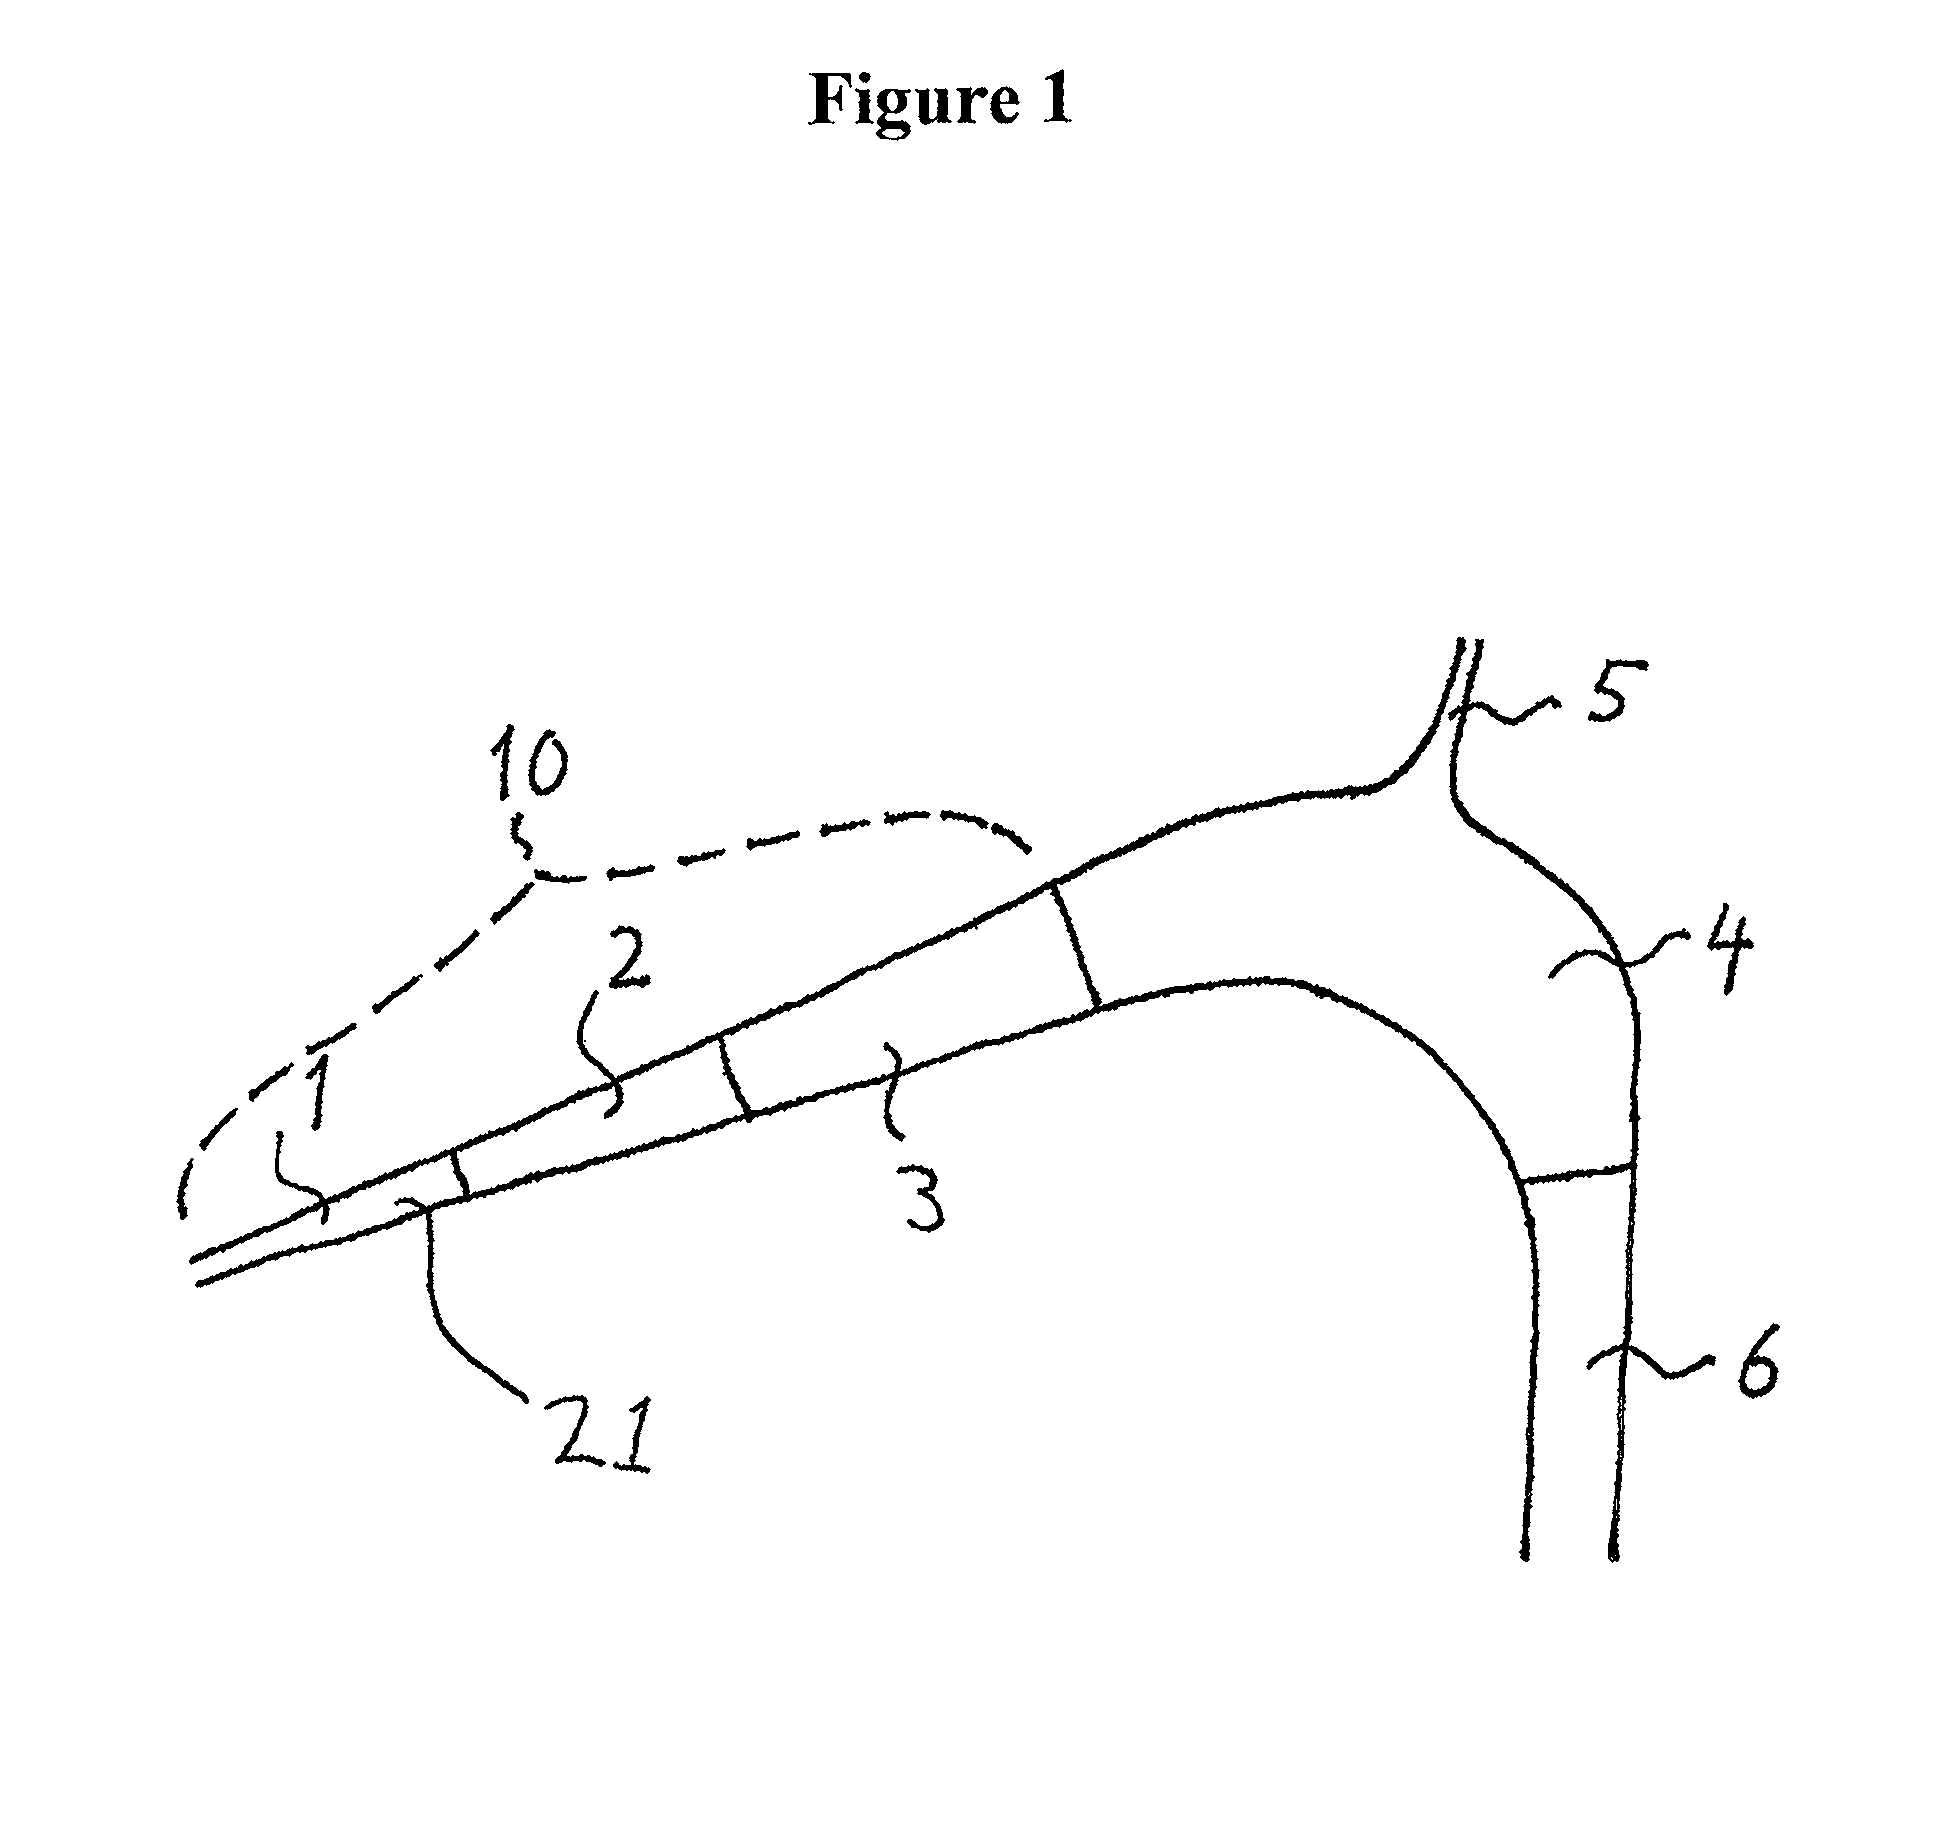 Bubble reducer for eliminating gas bubbles from a flow